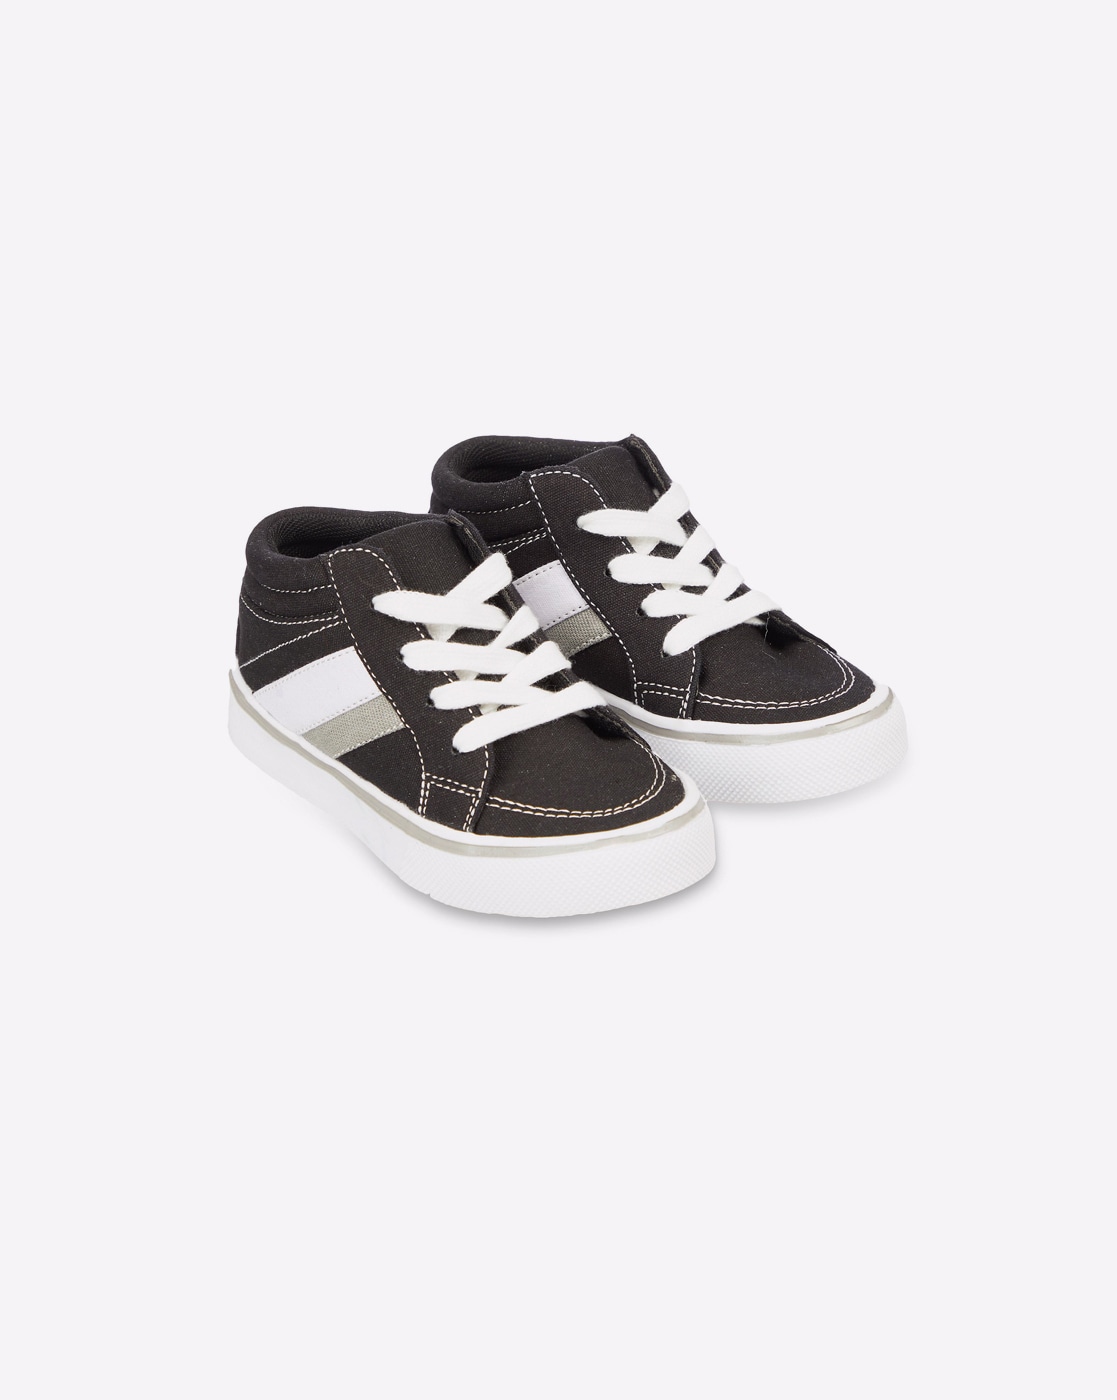 Buy Black Shoes for Boys by Mothercare 